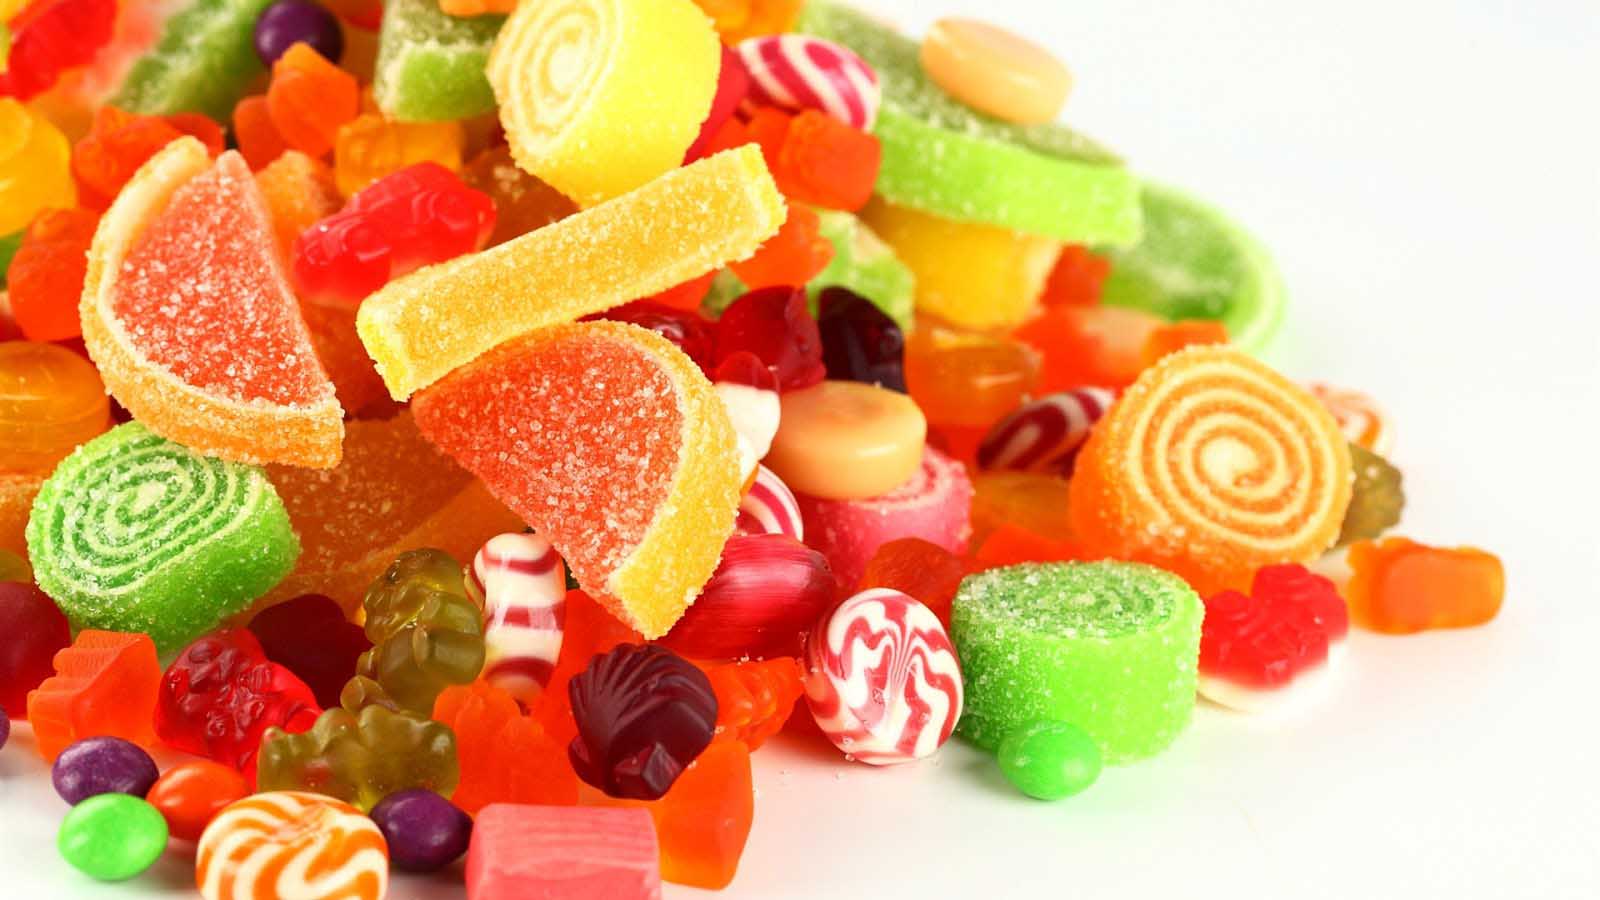 Sweet Candies Latest HD Wallpapers Free Download | New HD ...